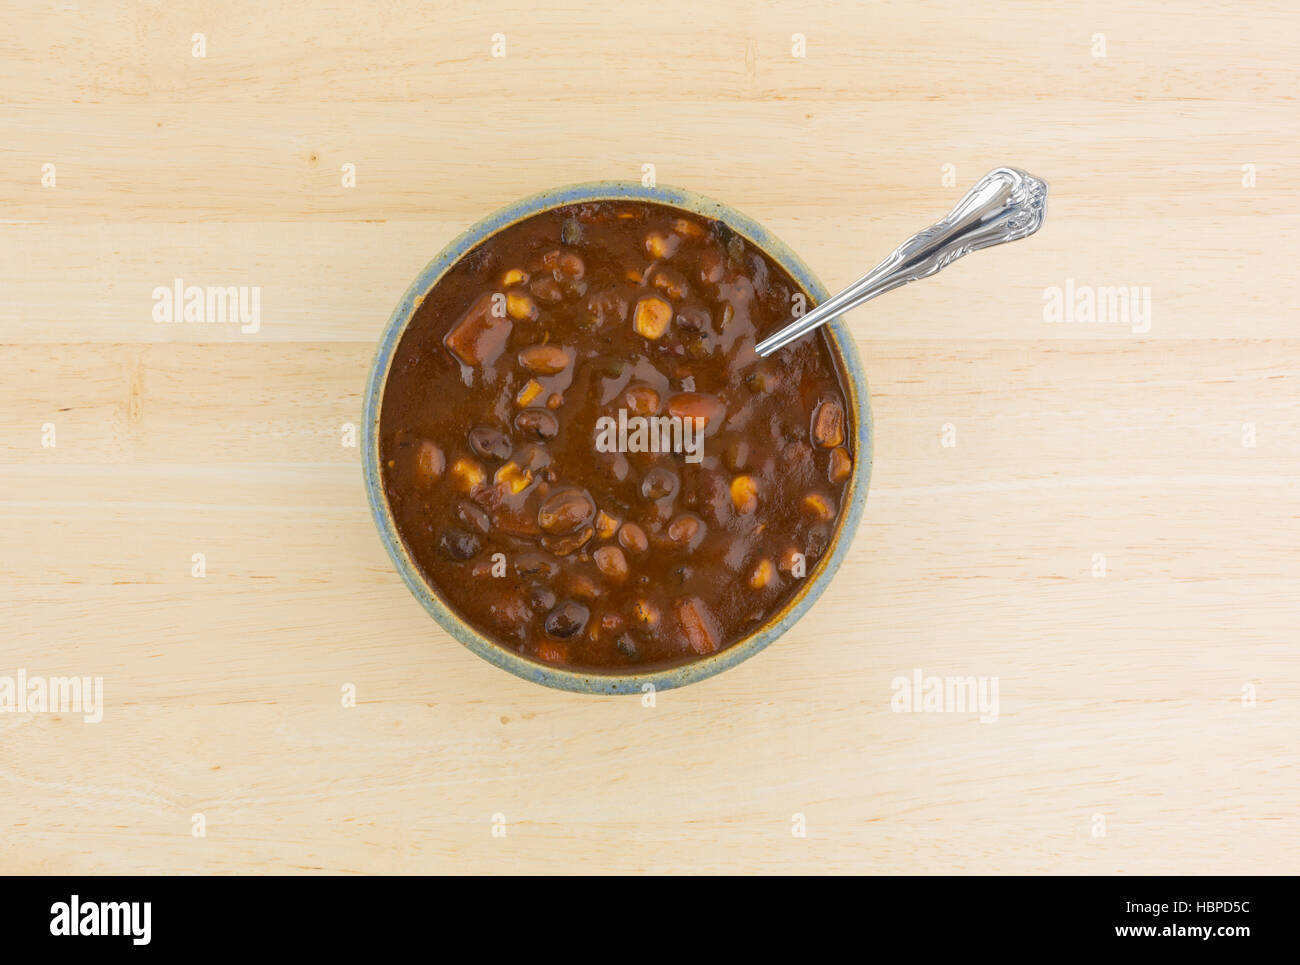 Top view of a bowl of vegetable three bean chili with  a spoon in the food atop a wood table top. Stock Photo